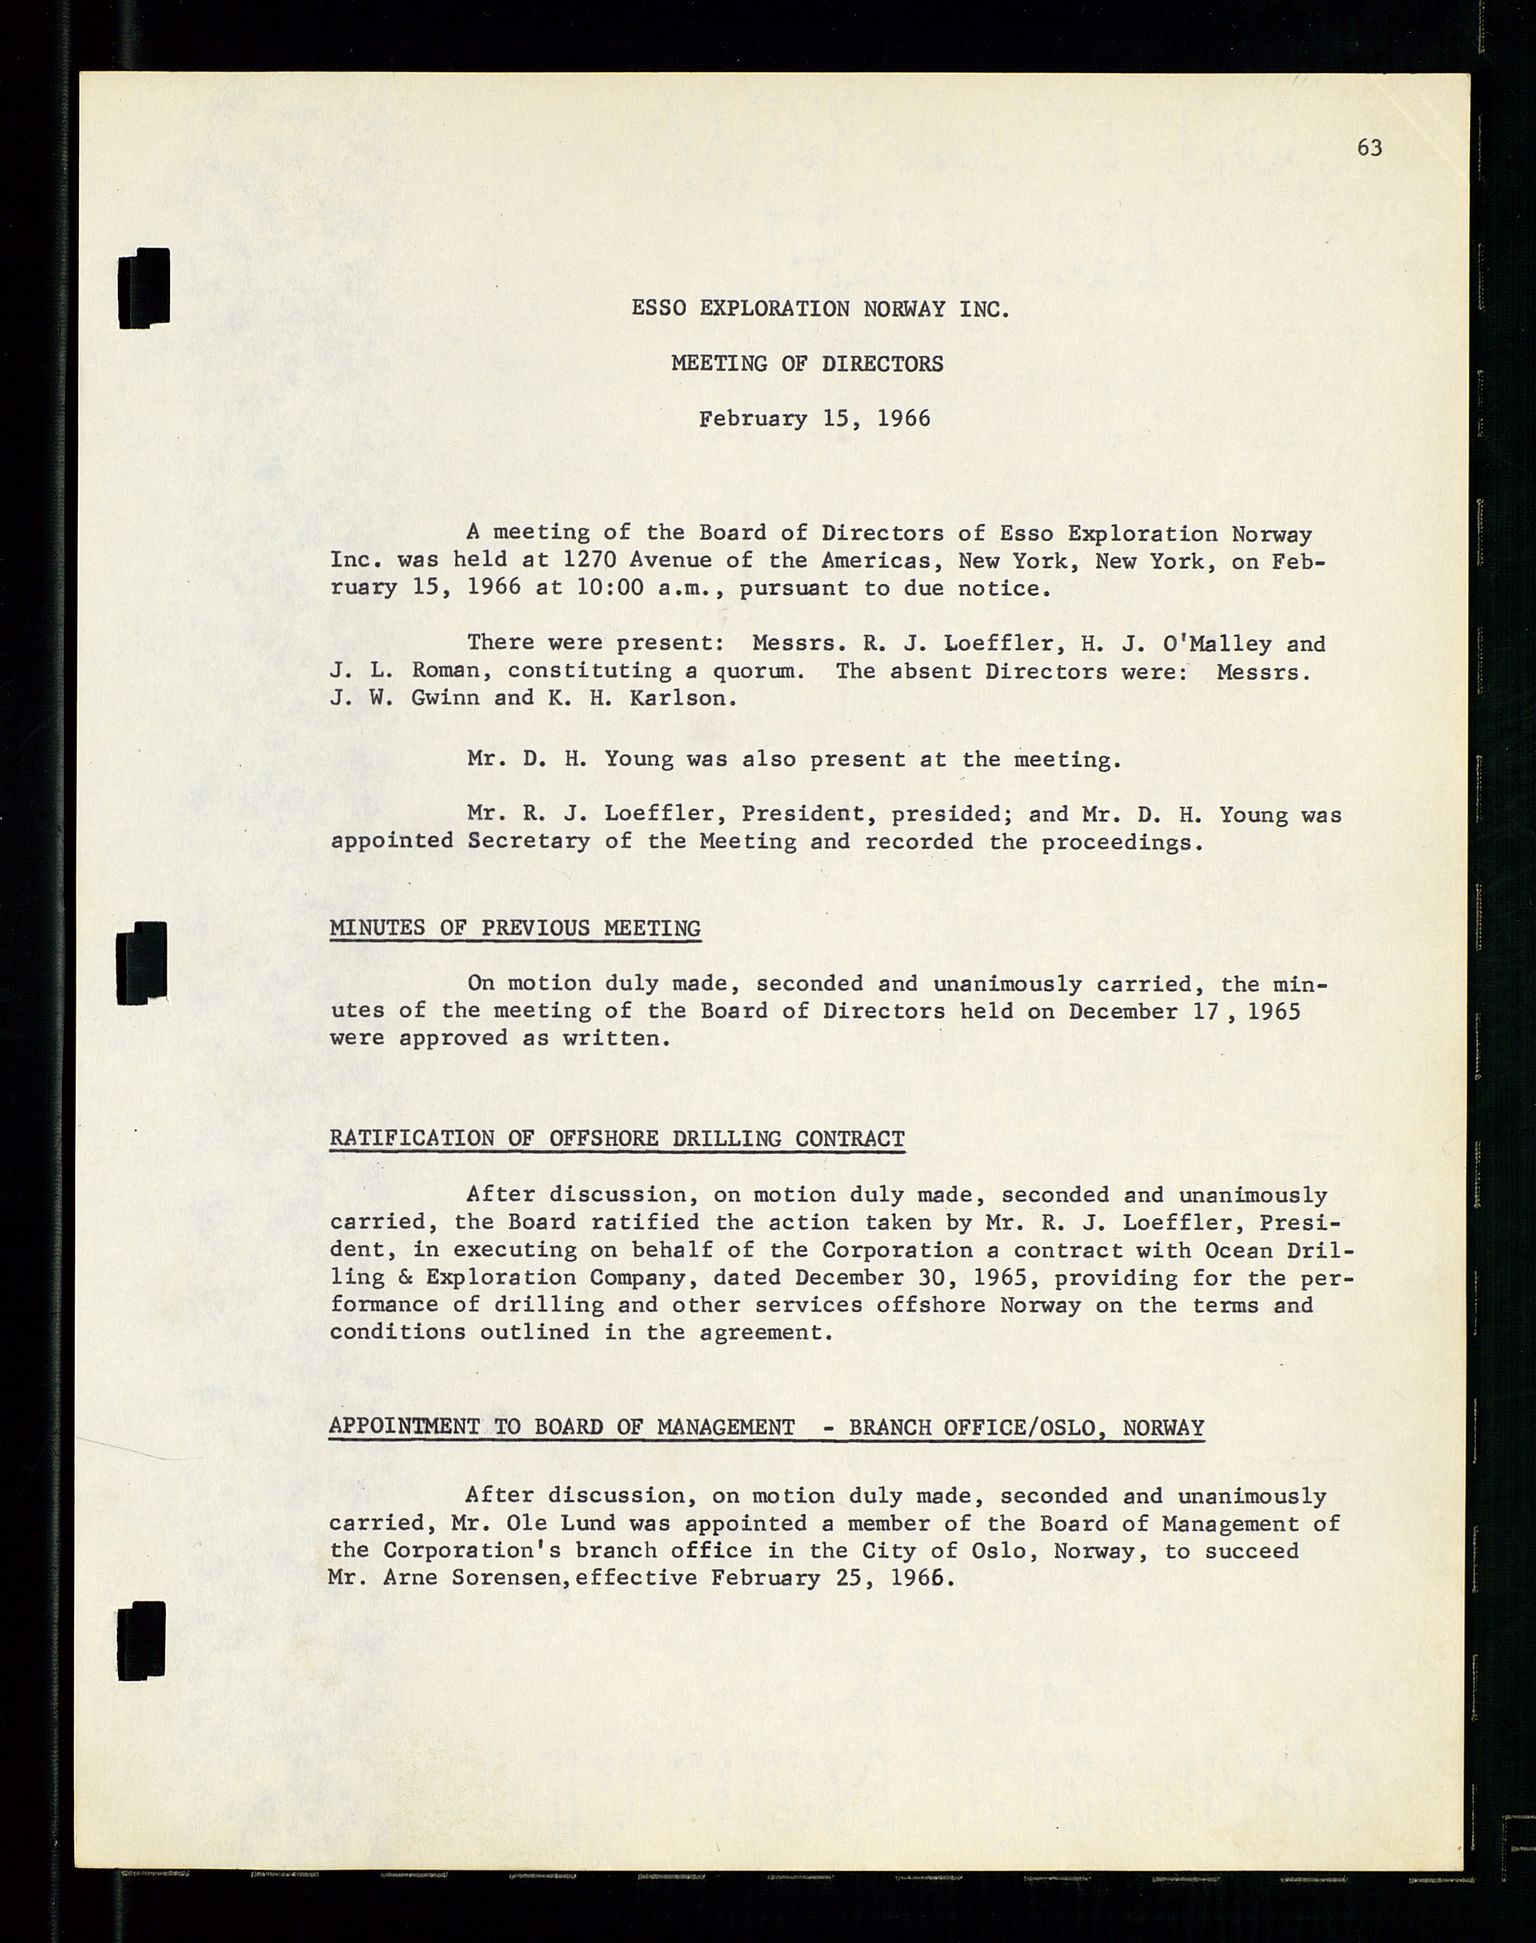 Pa 1512 - Esso Exploration and Production Norway Inc., SAST/A-101917/A/Aa/L0001/0001: Styredokumenter / Corporate records, By-Laws, Board meeting minutes, Incorporations, 1965-1975, s. 63